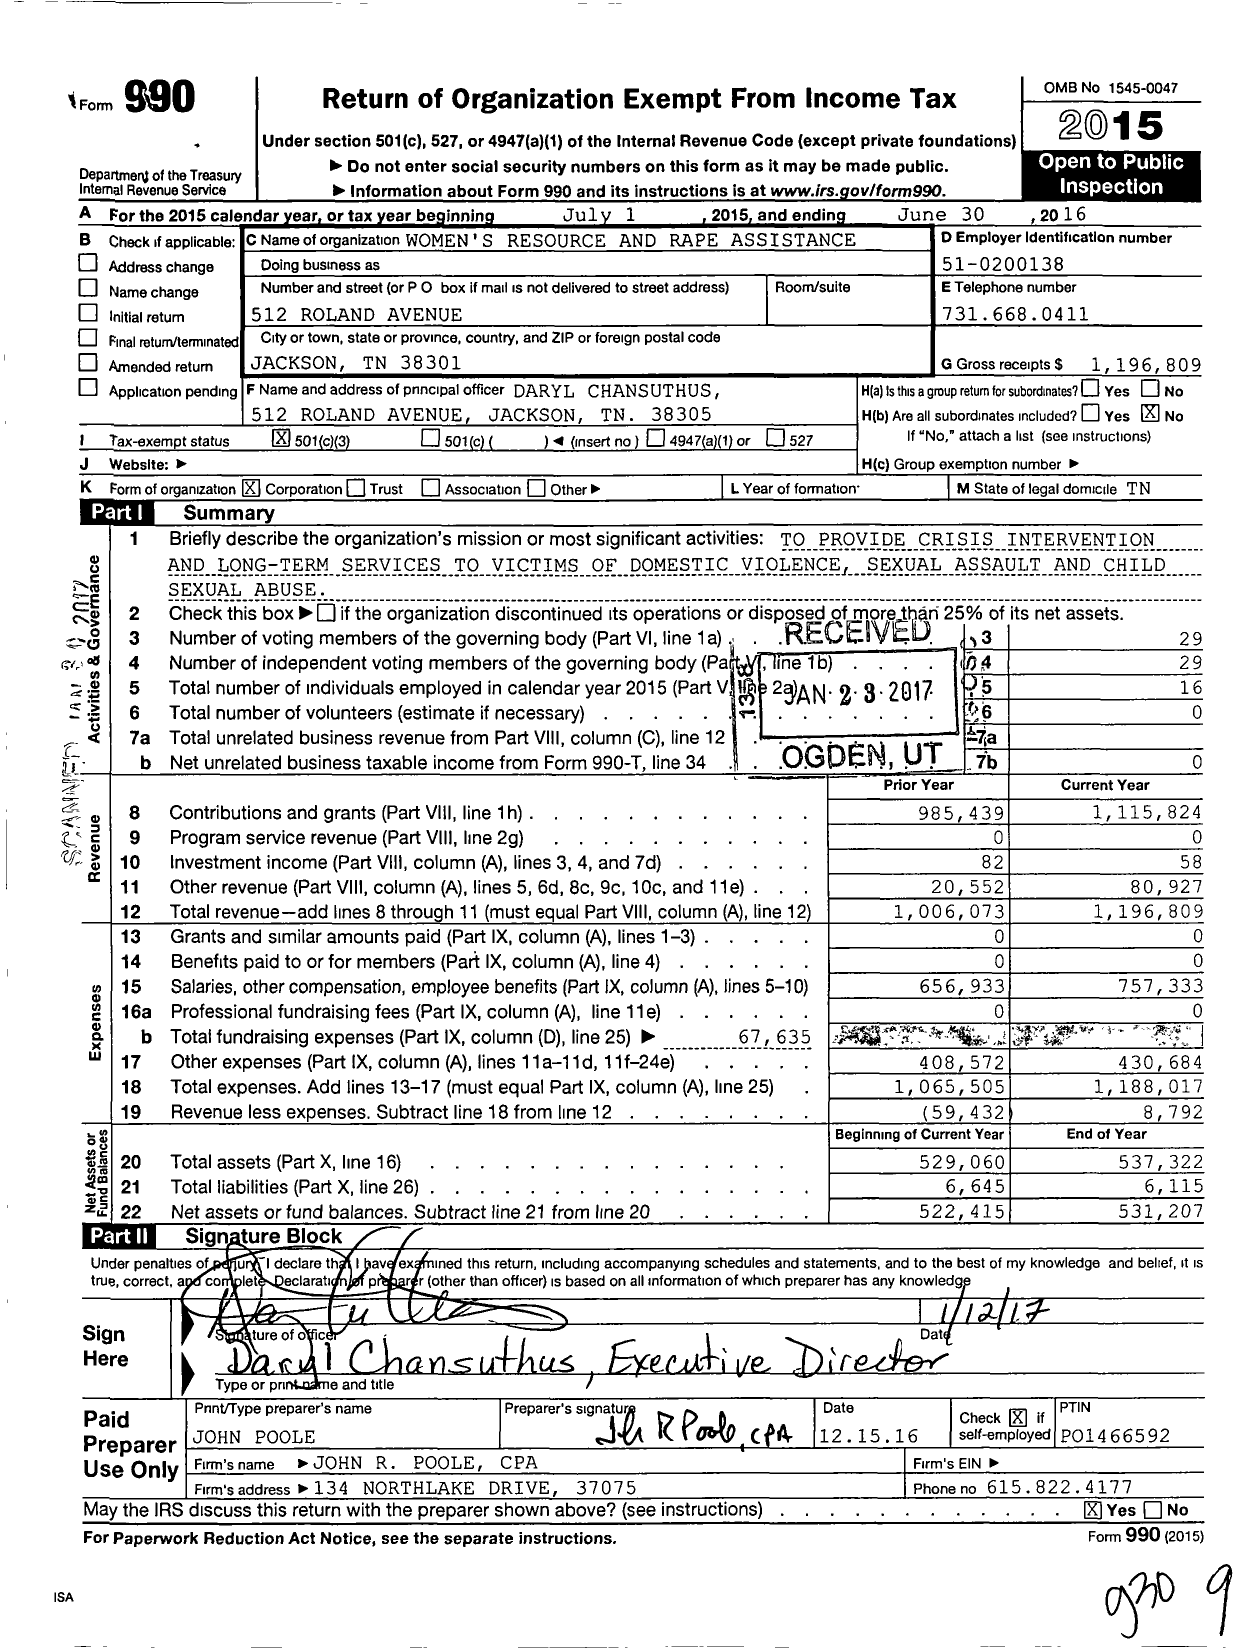 Image of first page of 2015 Form 990 for Women's Resource and Rape Assistance